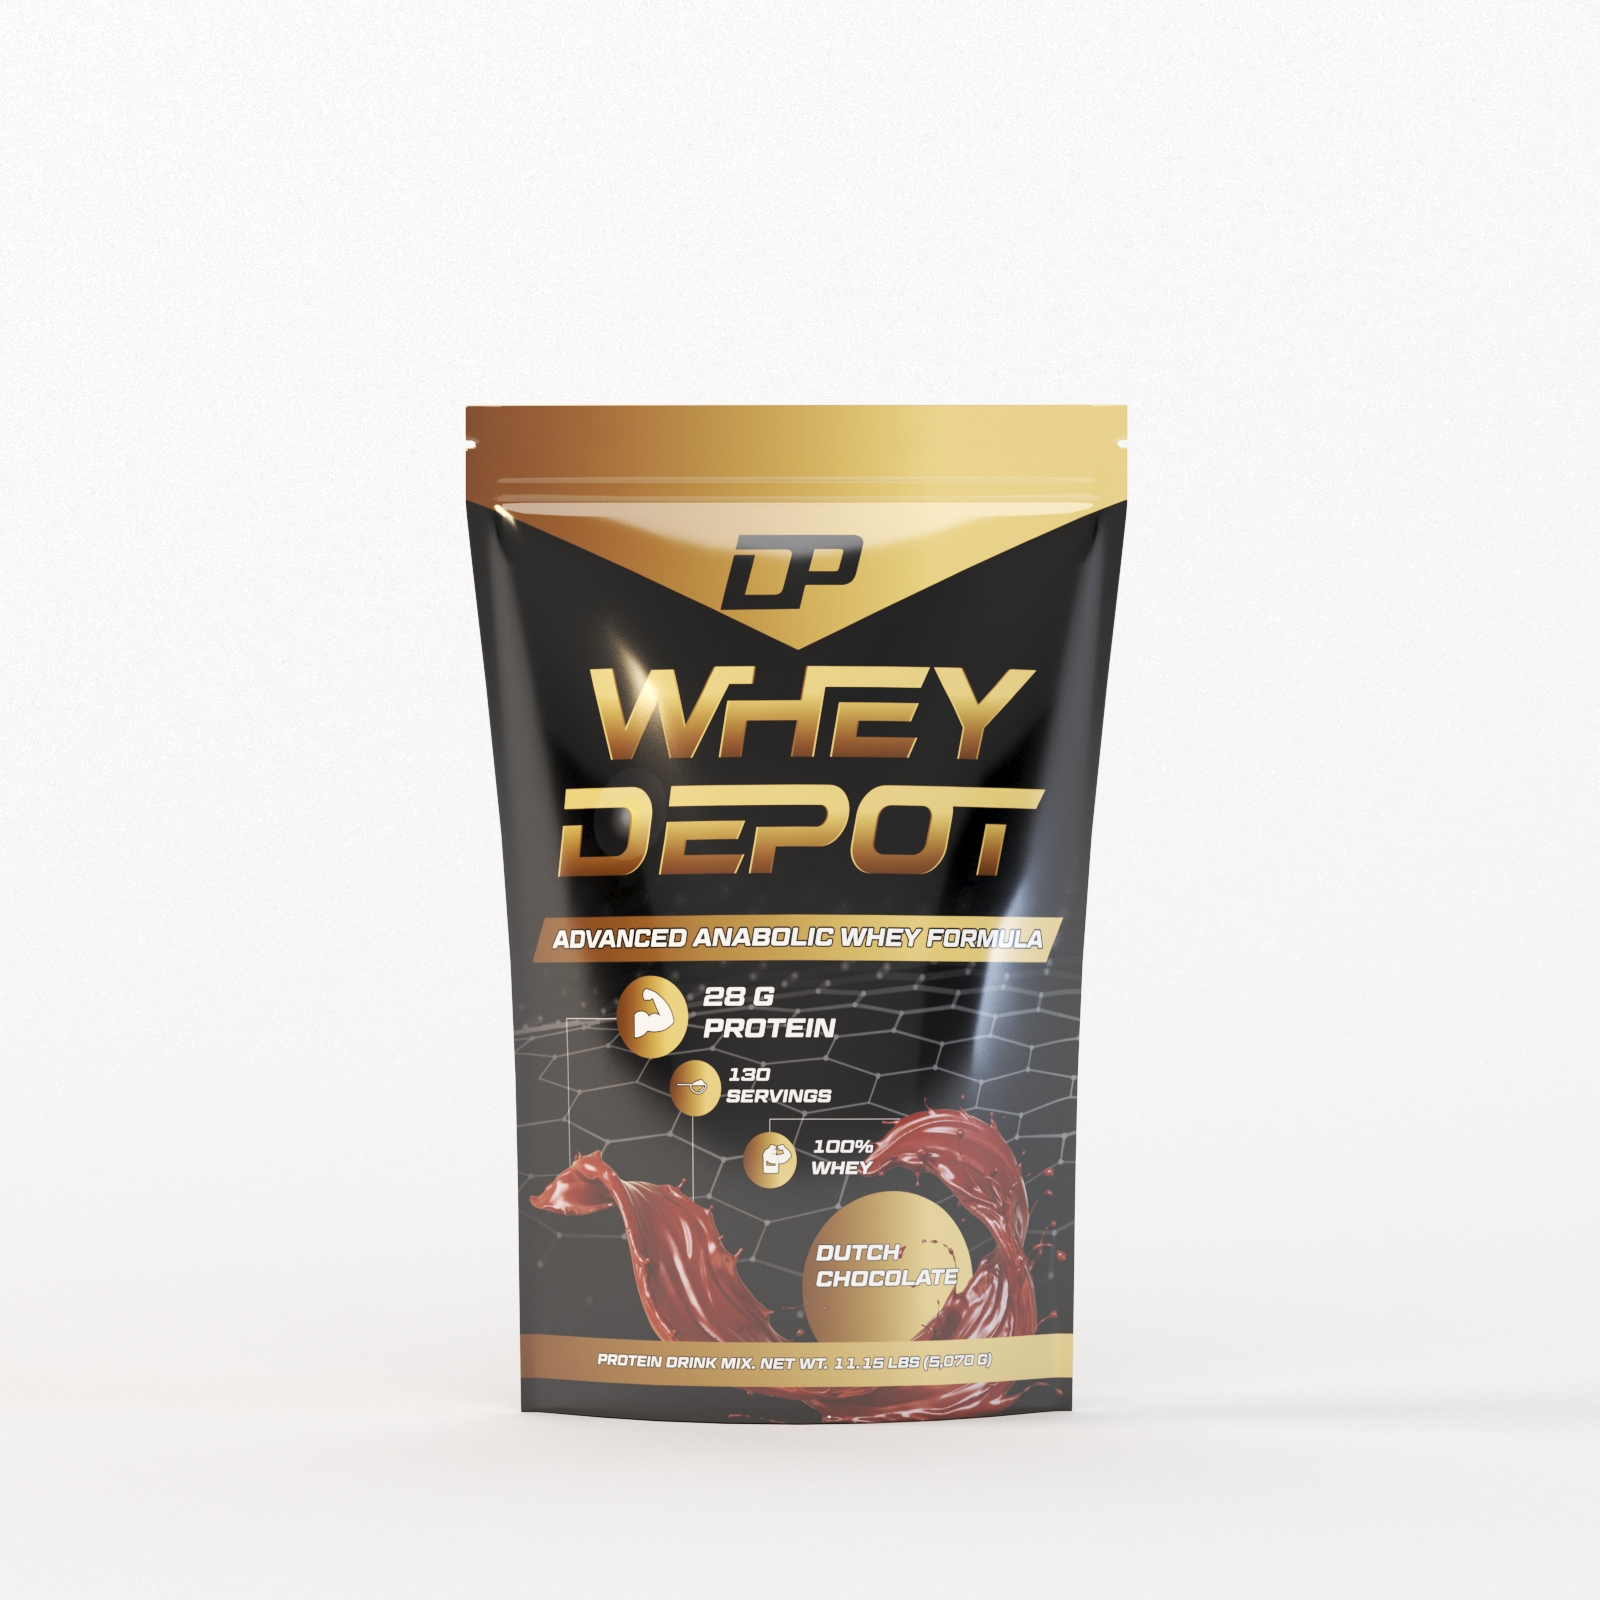 WHEY DEPOT® Protein